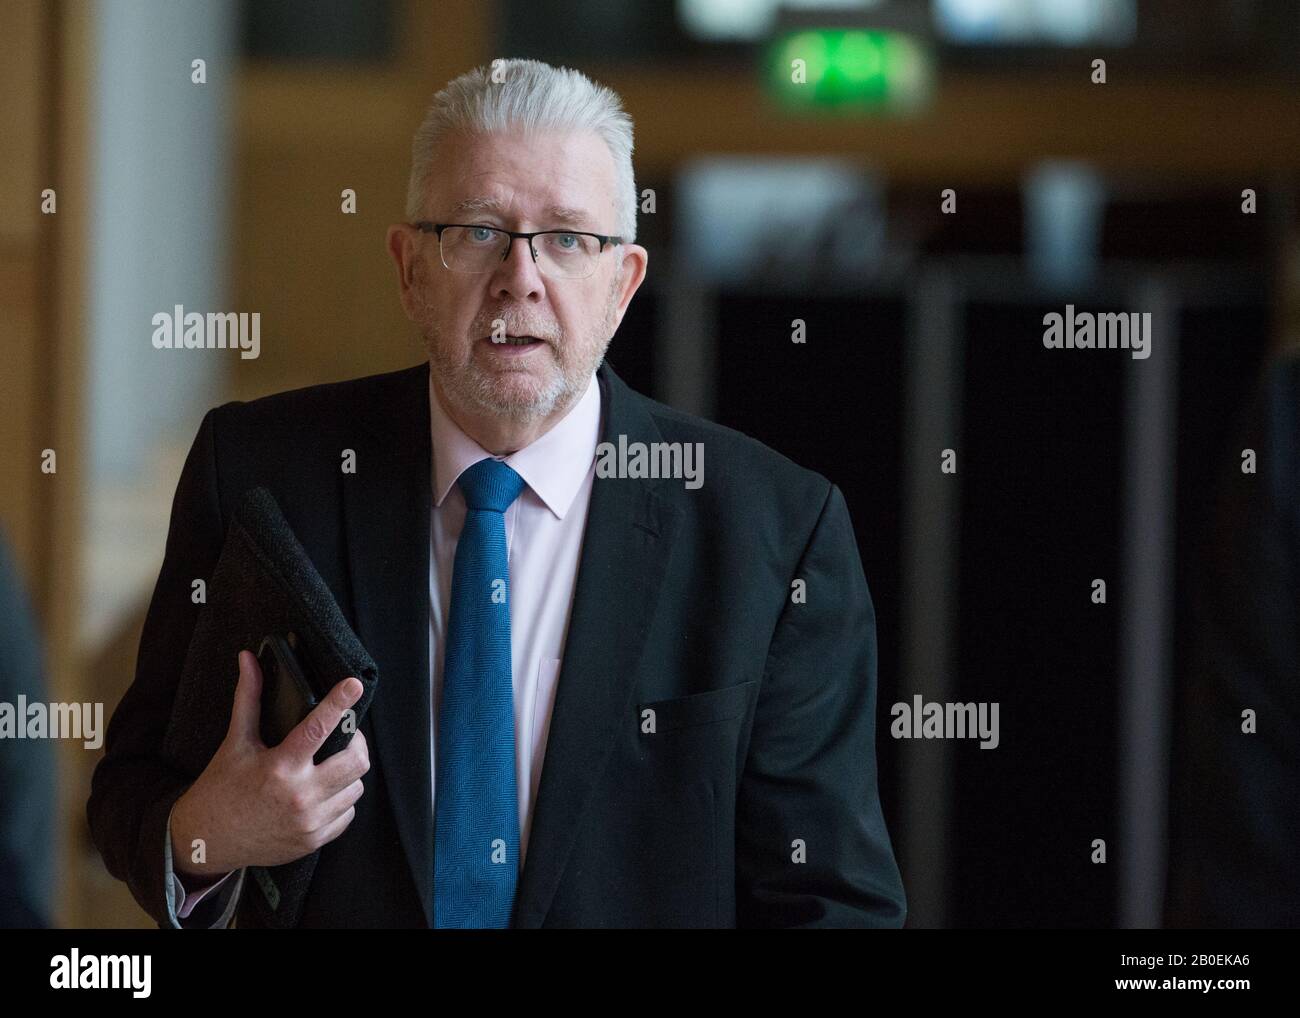 Edinburgh, UK. 20th Feb, 2020. Pictured: Michael Russell MSP - Cabinet Secretary for Government Business and Constitutional Relations. Scenes from First Ministers Questions at the Scottish Parliament in Holyrood, Edinburgh. Credit: Colin Fisher/Alamy Live News Stock Photo